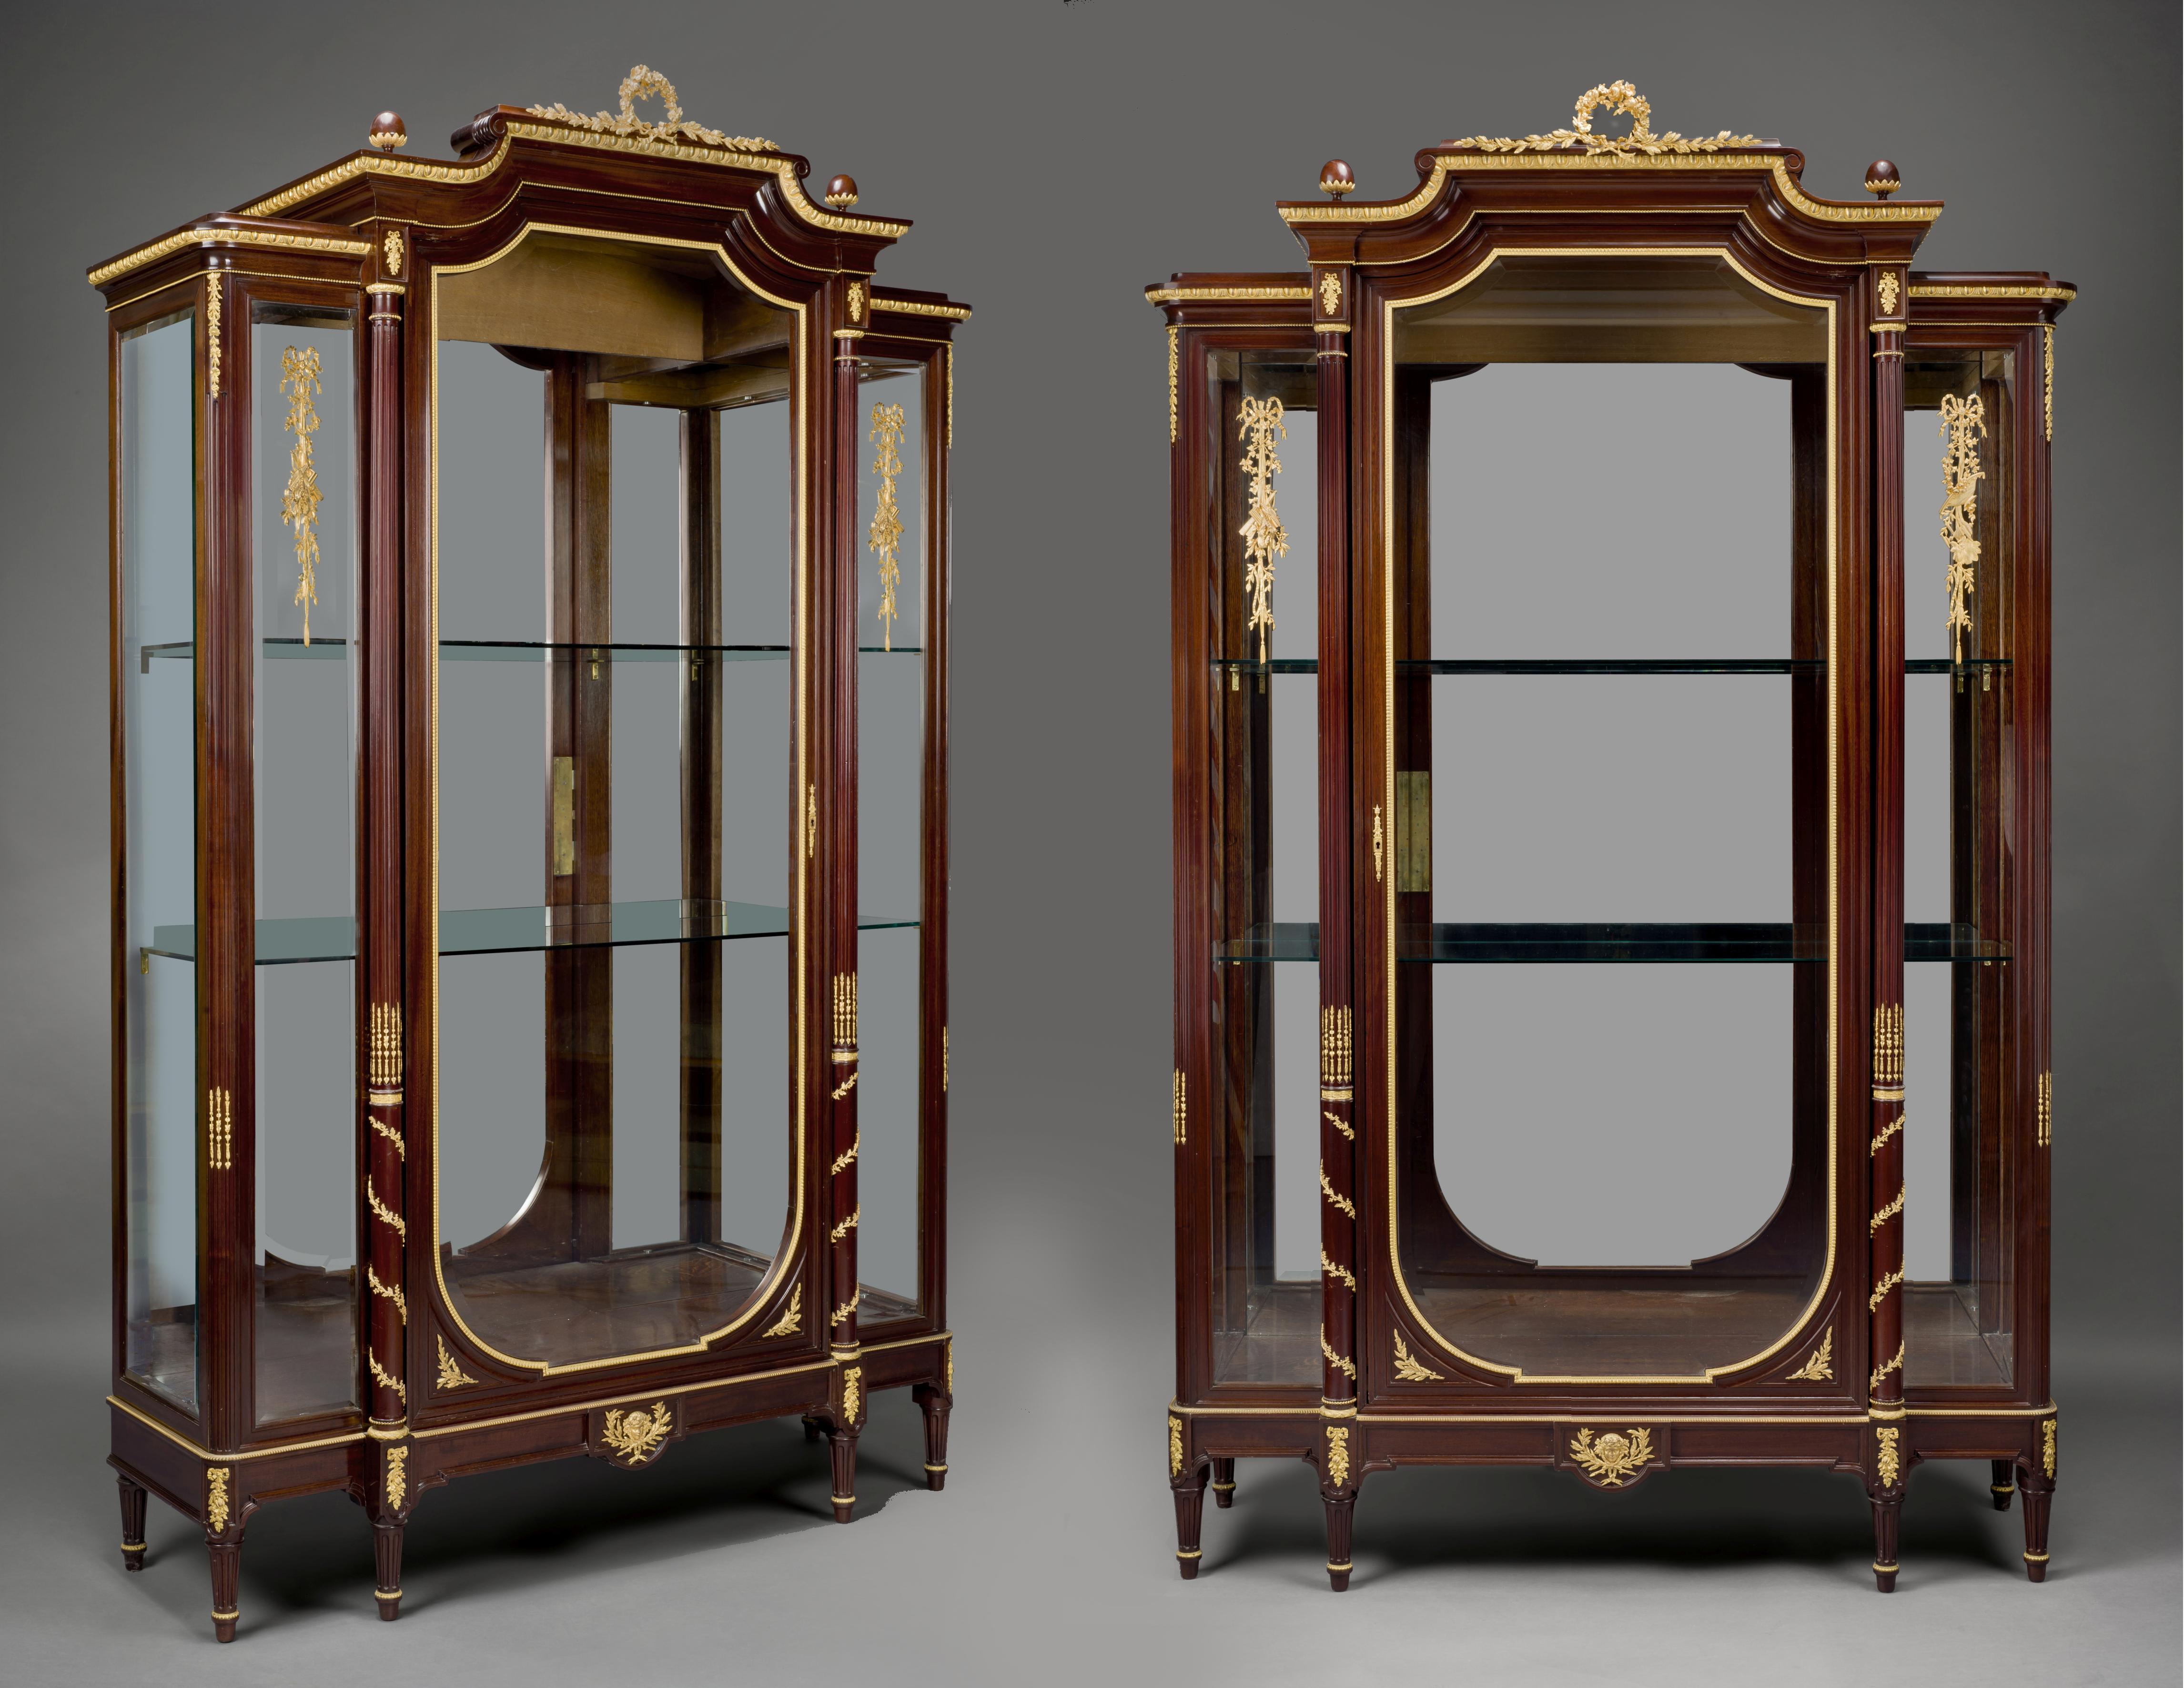 An impressive pair of Louis XVI style gilt bronze mounted mahogany vitrines by François Linke. 

French, circa 1890.

Signed to the reverse of the bronze mounts ‘LINKE’.

Each vitrine has a spreading pediment centred to the top by a